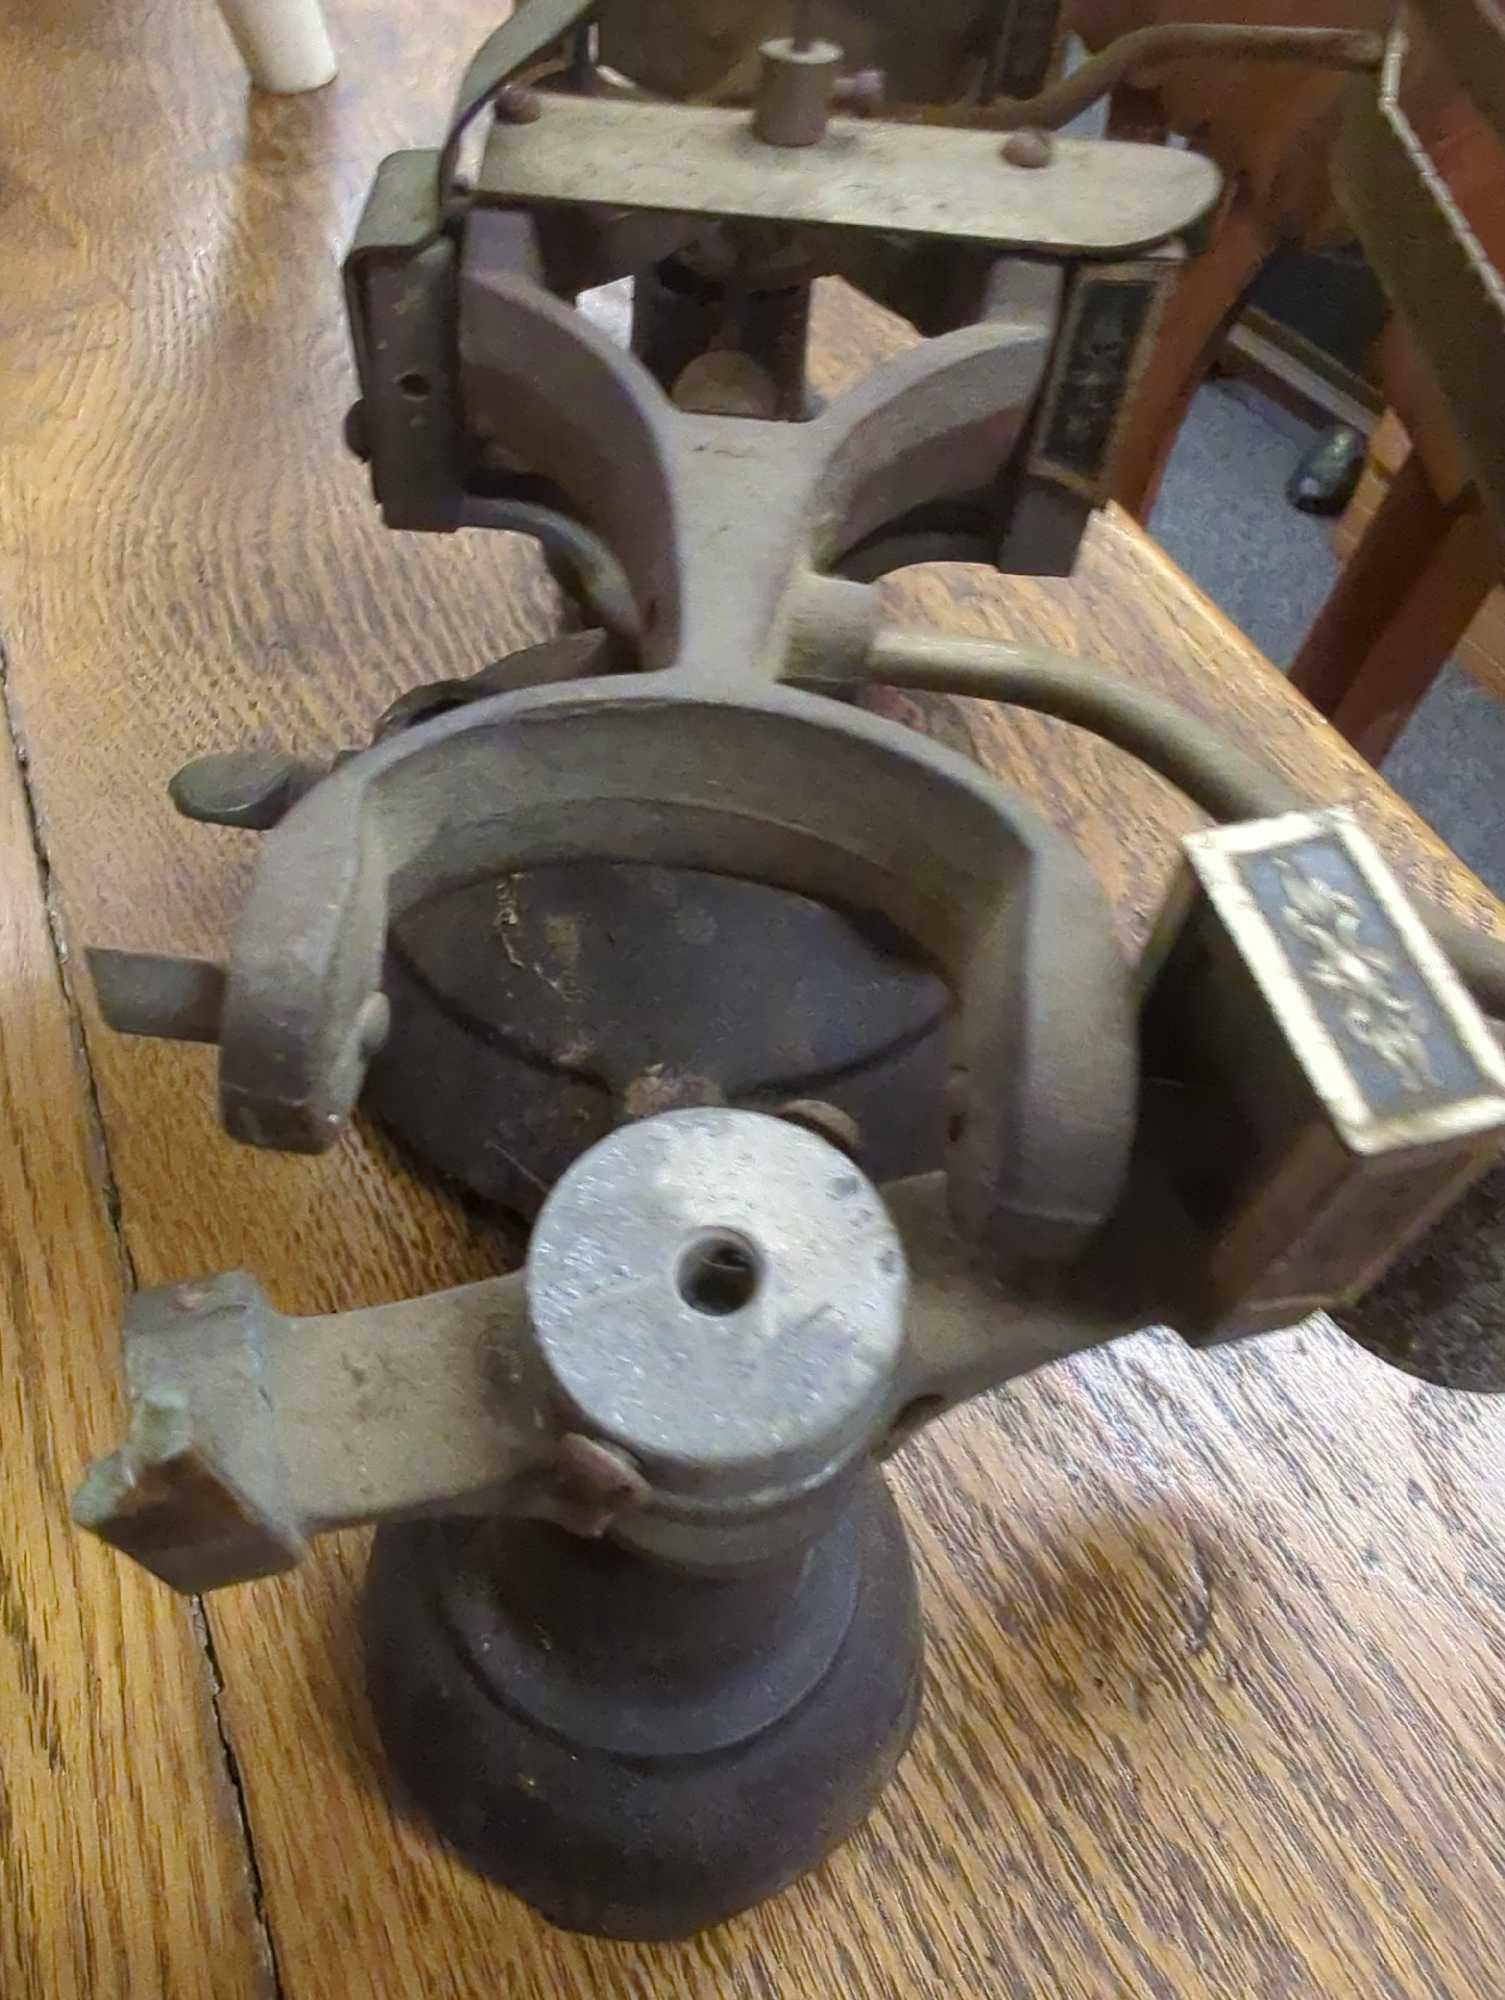 Vintage Ohaus Cast Iron Double Beam Weight Scale, Scale Has Some Damage, Is Missing One Side Of the